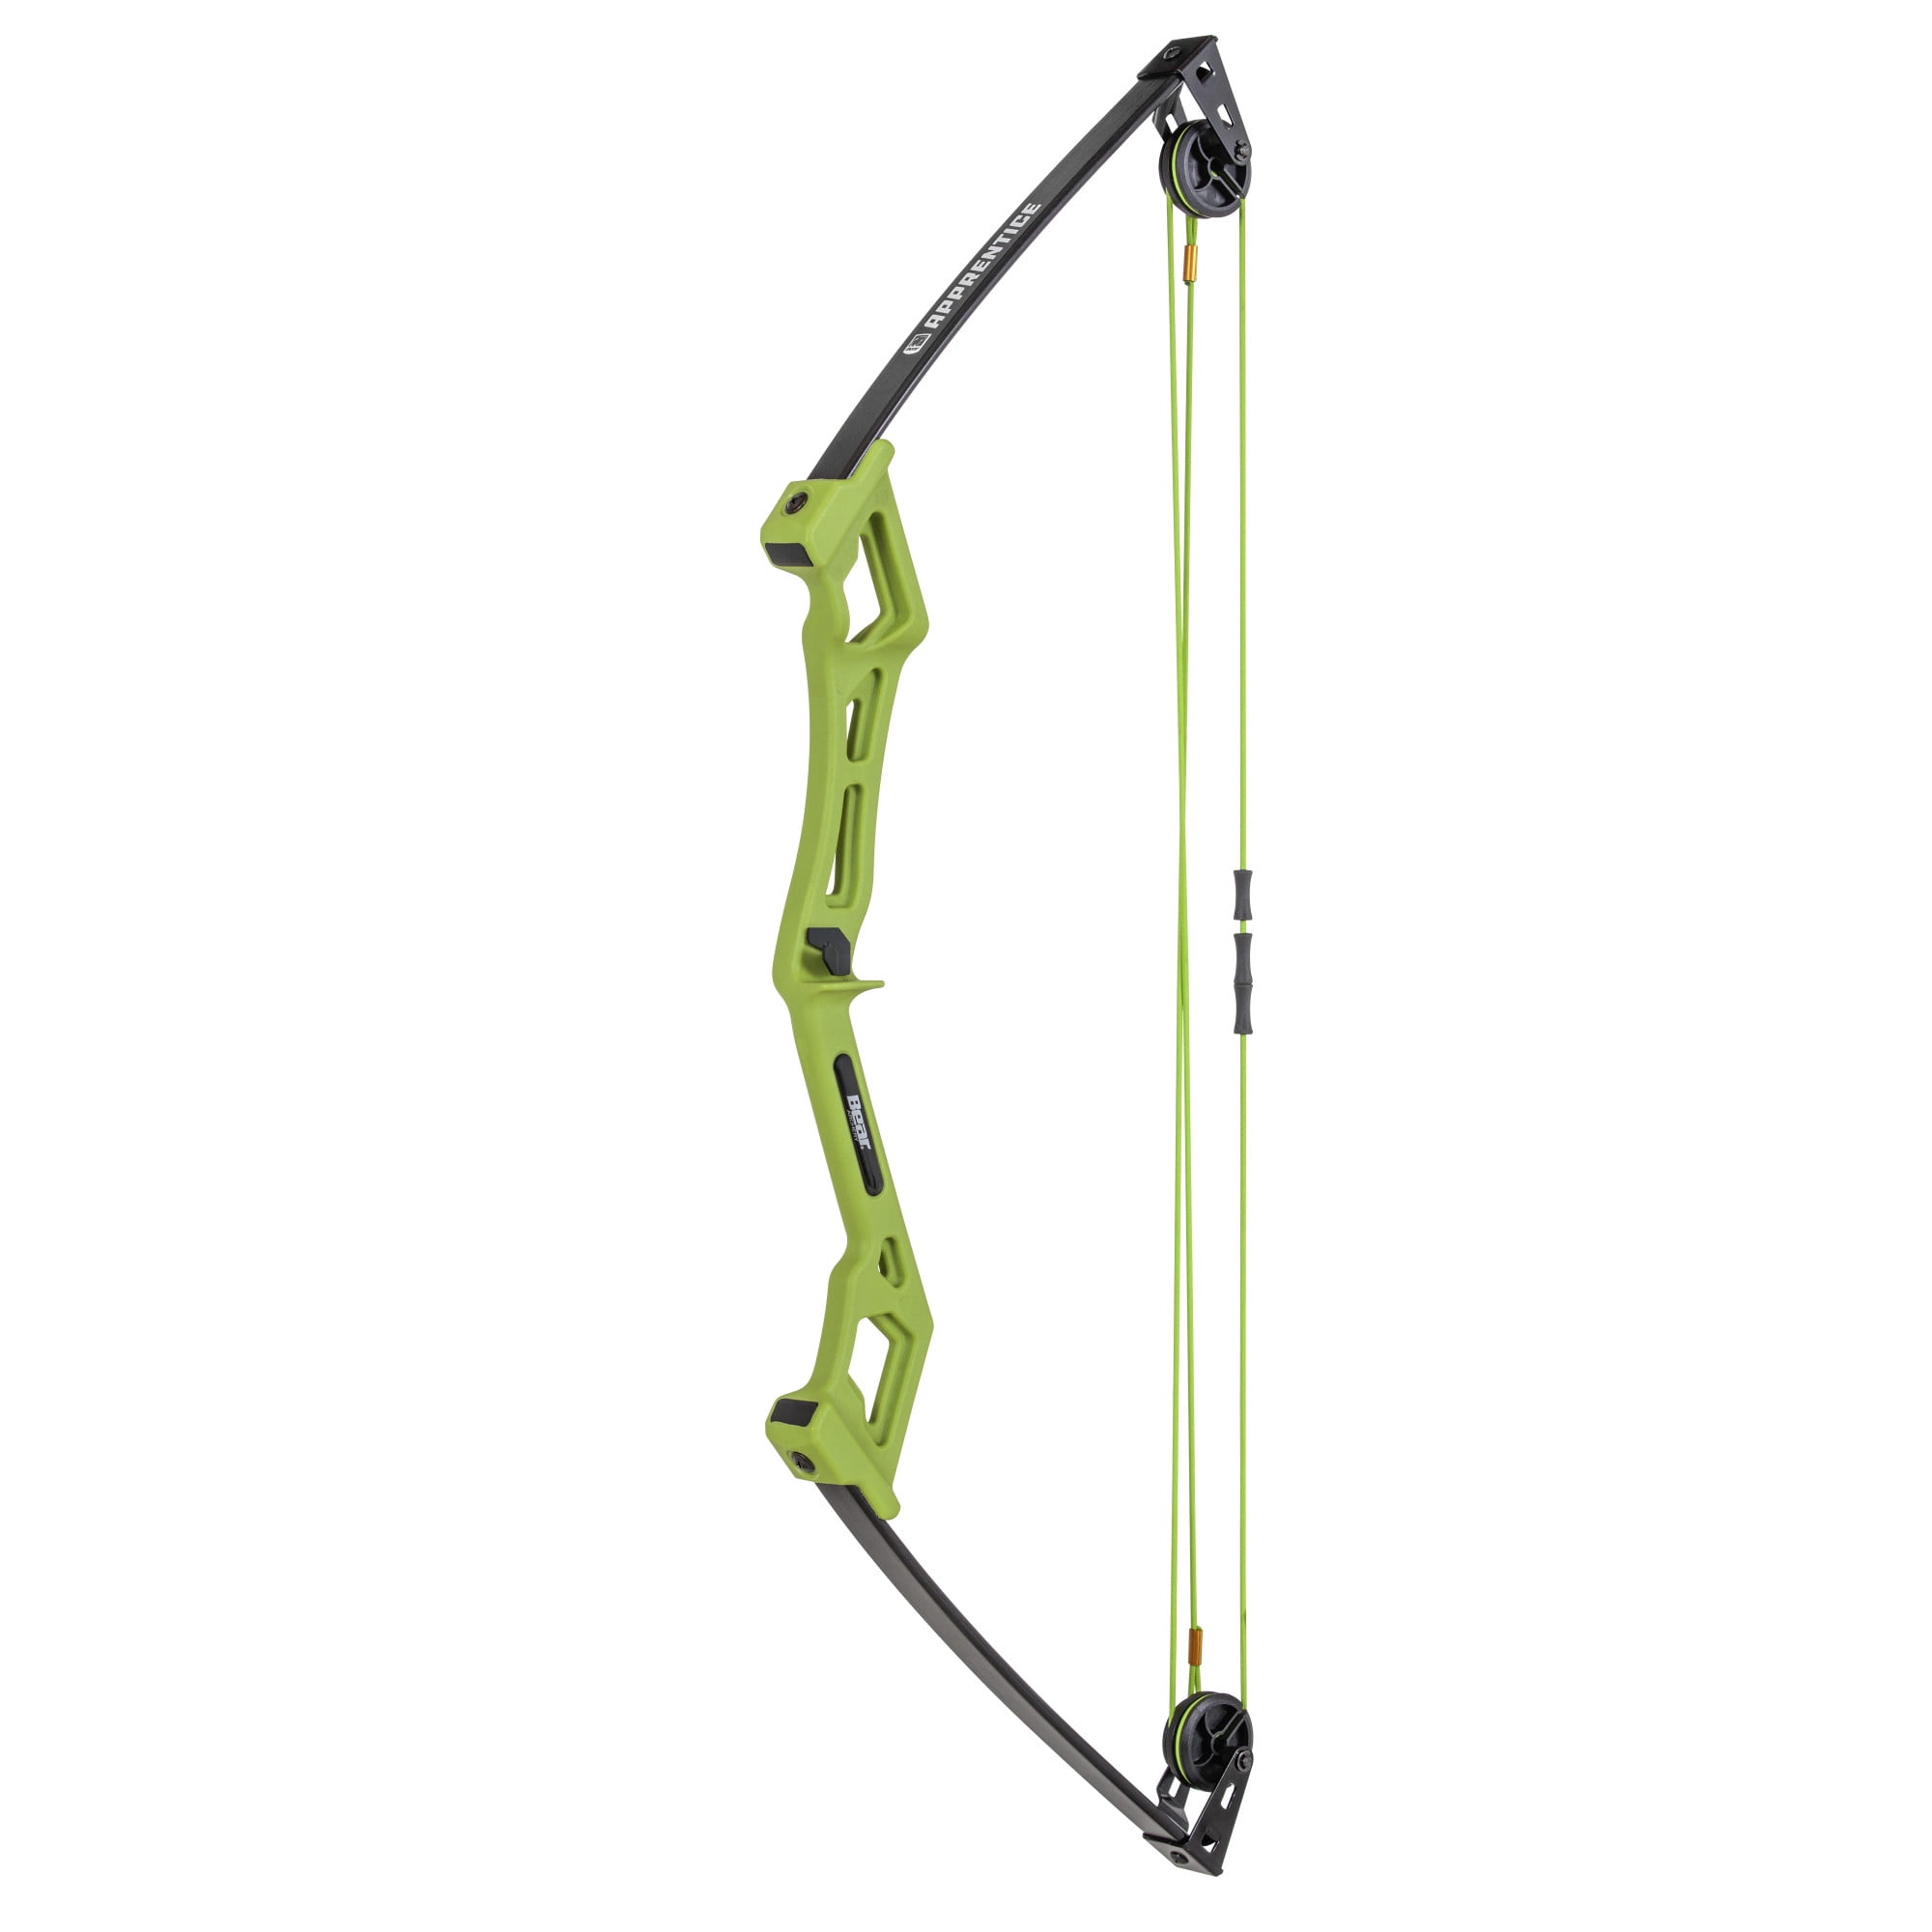 Bear Archery Apprentice Youth Bow Set Featuring 6-13.5 lb. Draw Weight and 13- to 24-inch Draw Length Range and 27” Axle-to-Axle Right-Handed Bow with Durable Composite Limbs